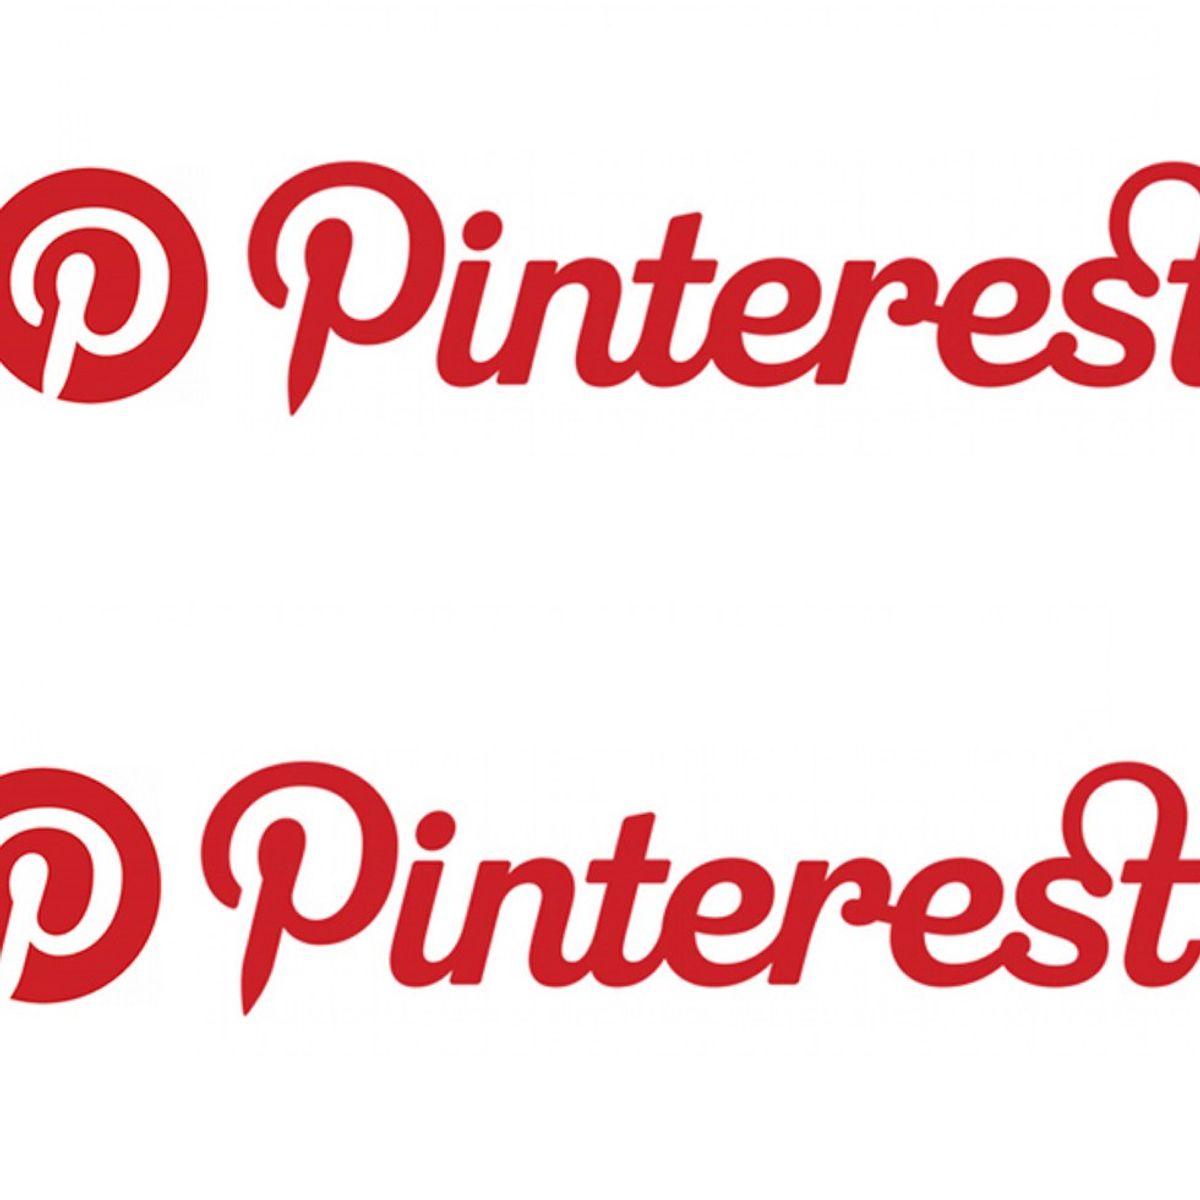 Why Pinterest Is The Best & How To Use It